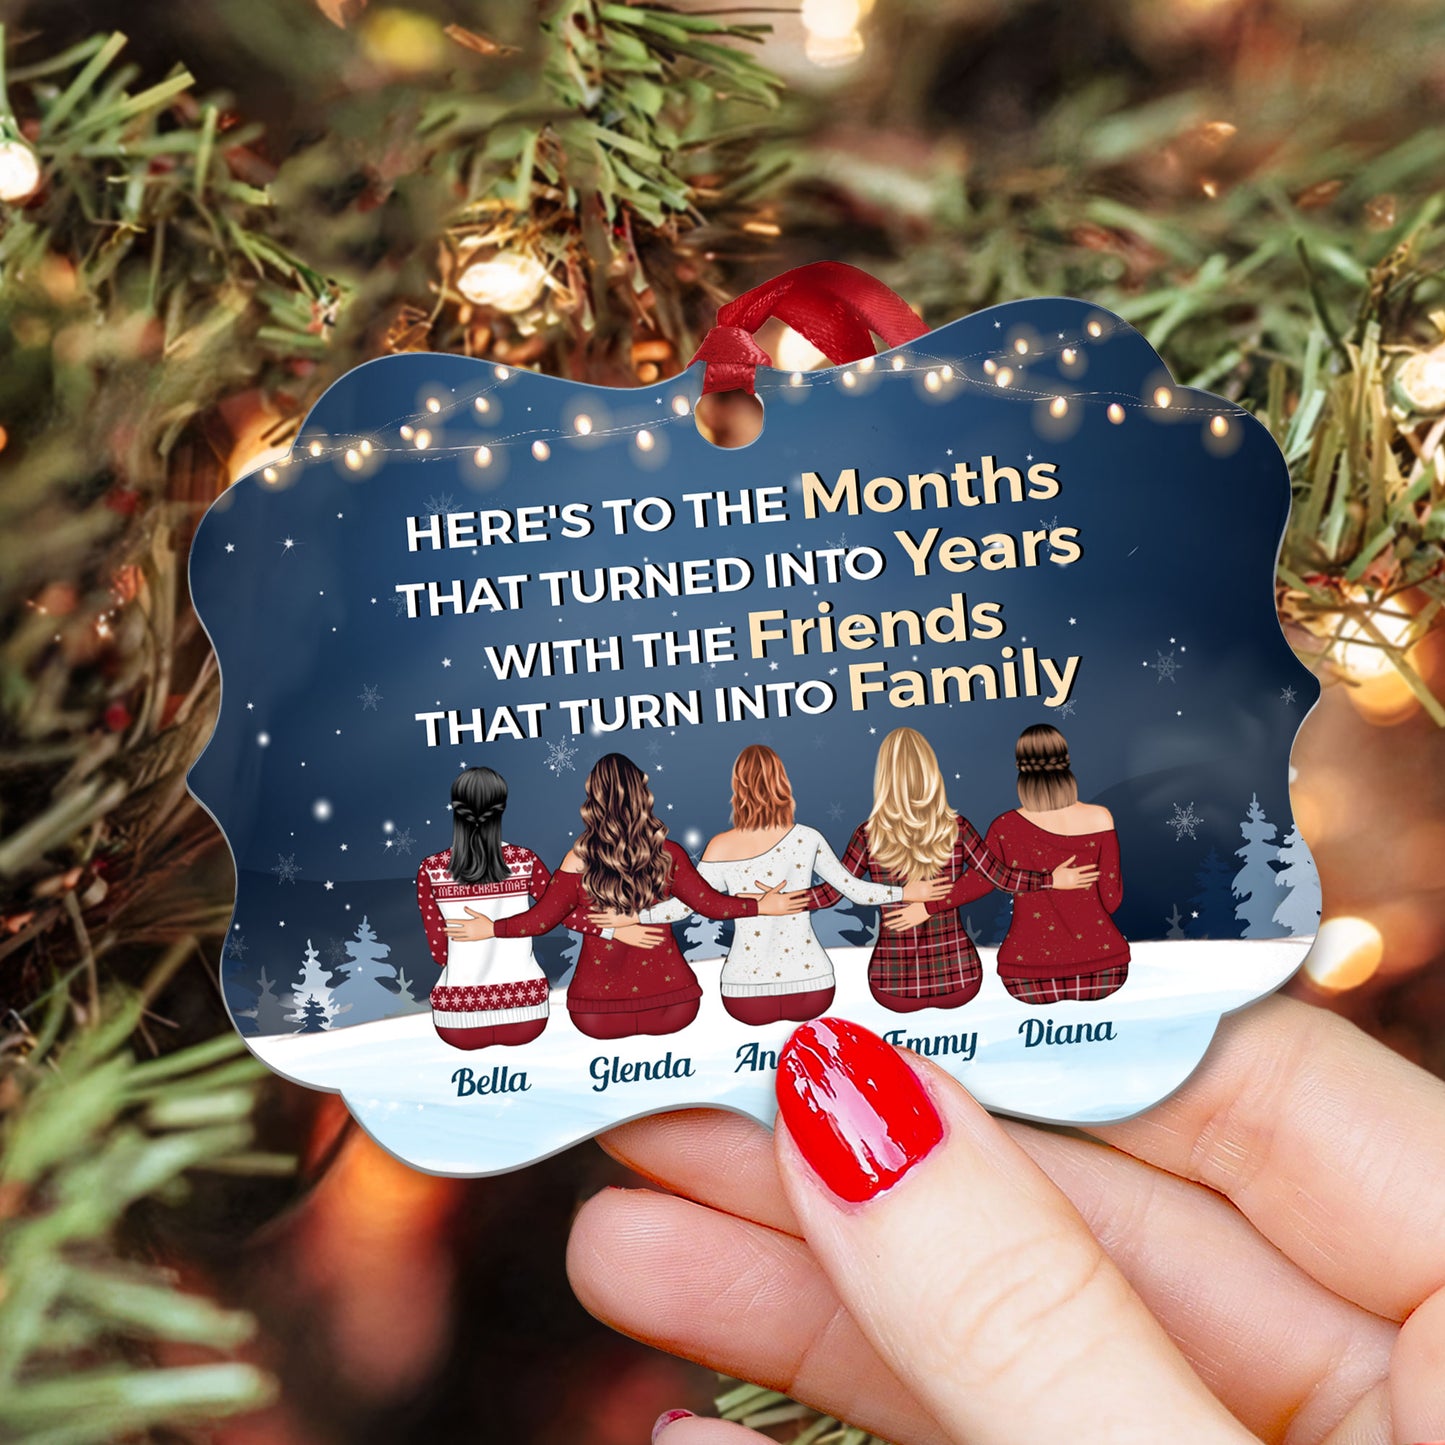 Here's To The Months That Turned Into Years - Personalized Aluminum Ornament - Christmas Gift For Friends, Besties, Co-Workers, BFF